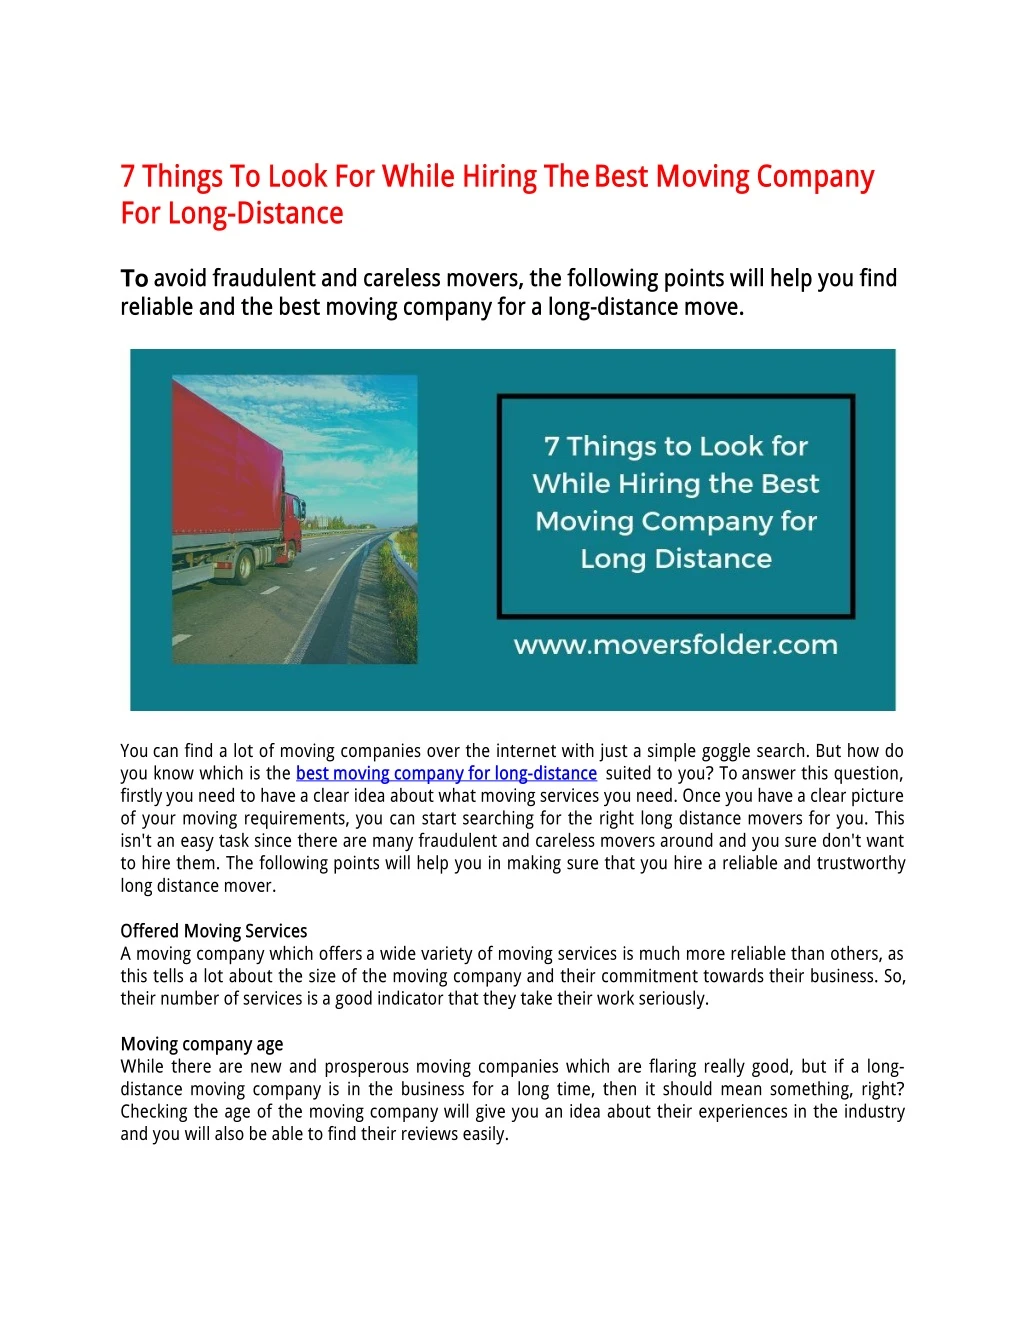 7 things to look for while hiring the best moving